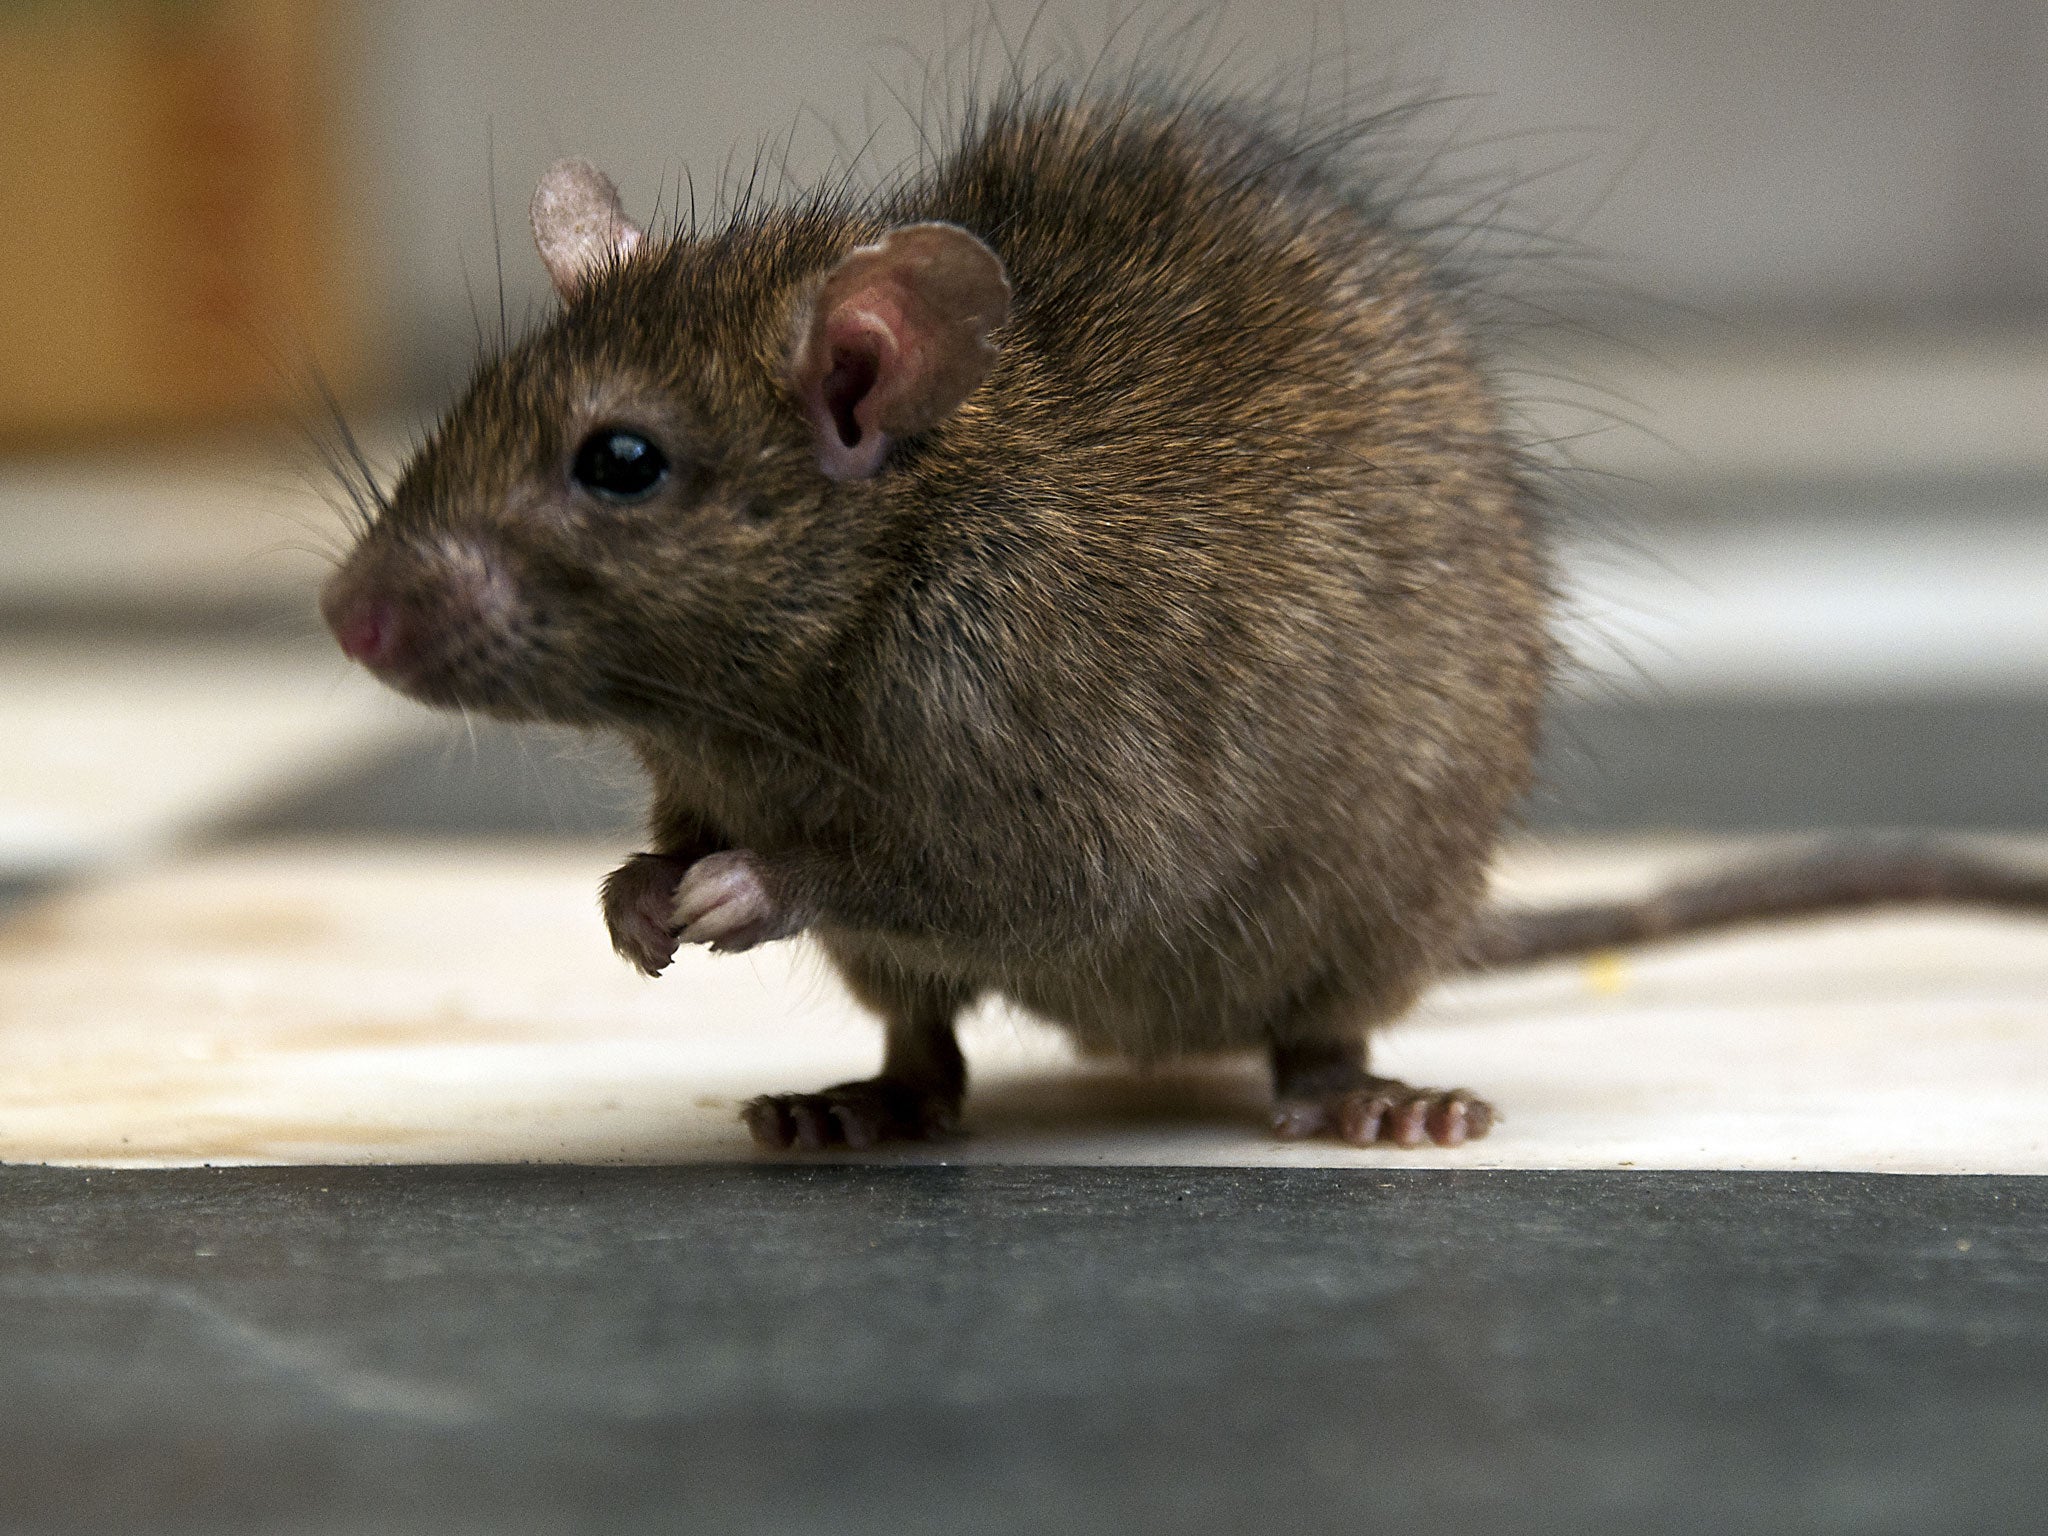 Rats the size of a "small cat" have been spotted in the city's streets